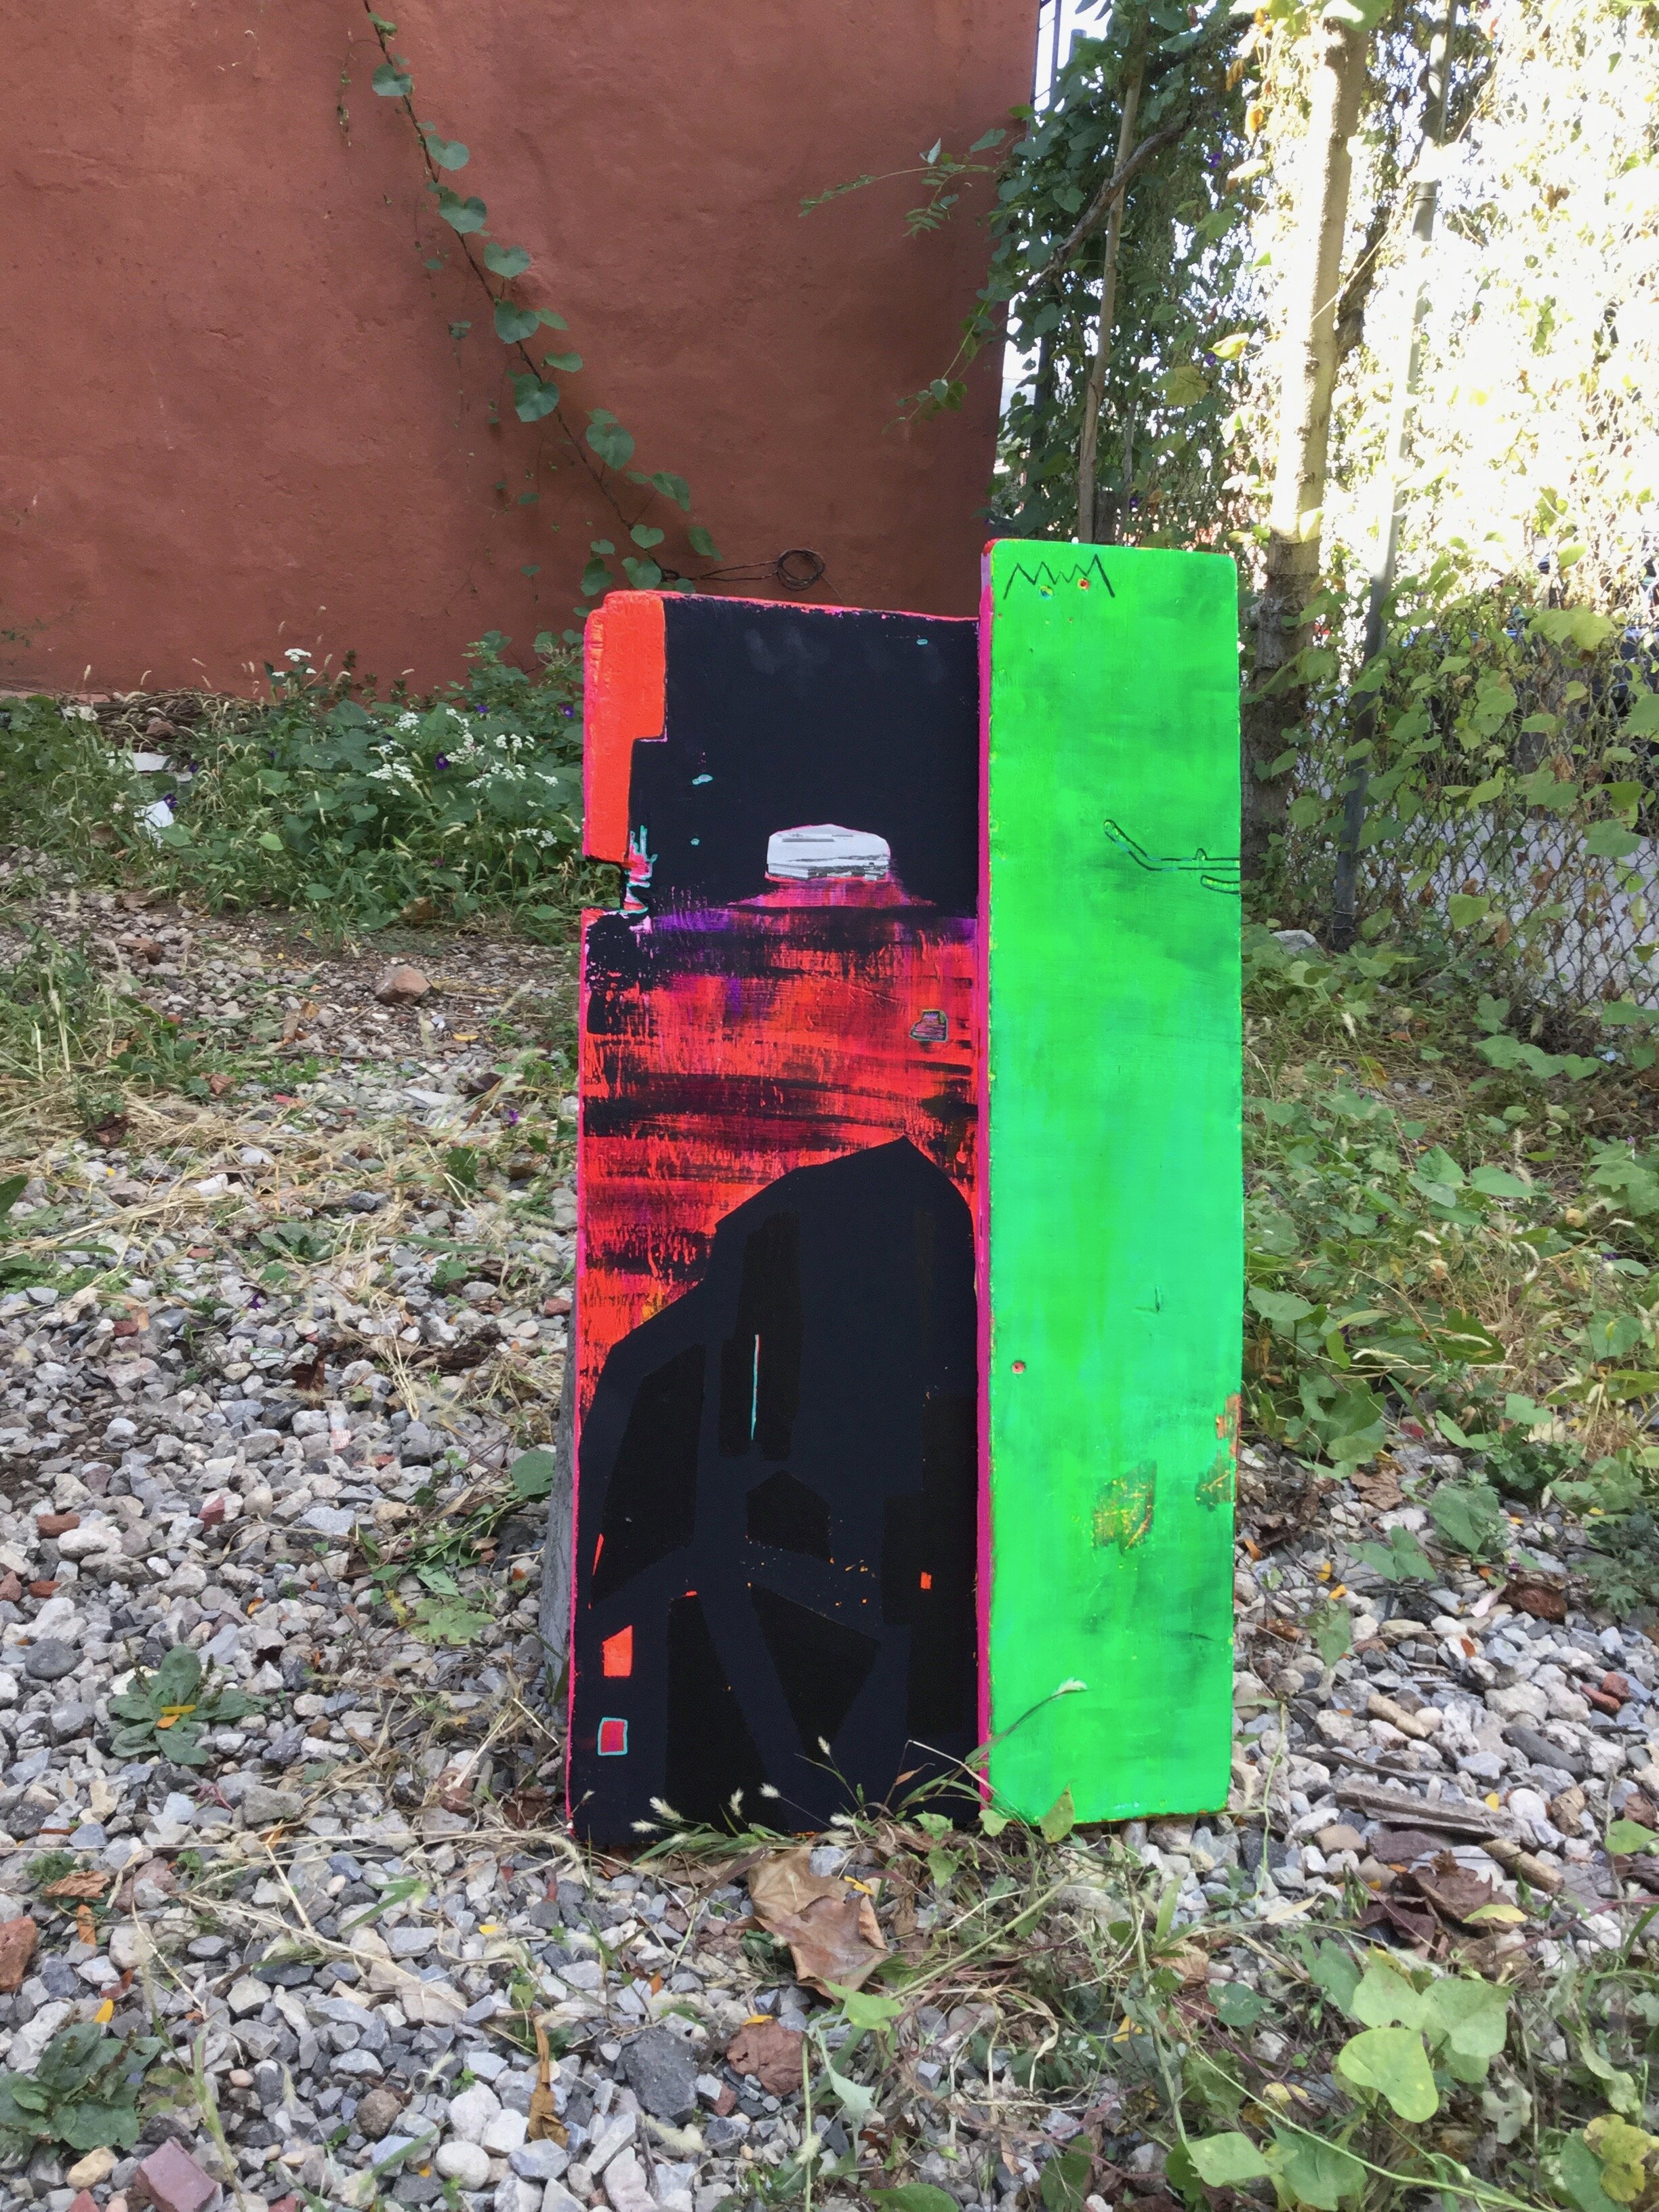  From  Grave/Monolith Series,  Site-specific installation at Art Lot Brooklyn.    Acrylic, Flashe, glitter, collage, ink and colored pencil on found wood, dimensions variable. 